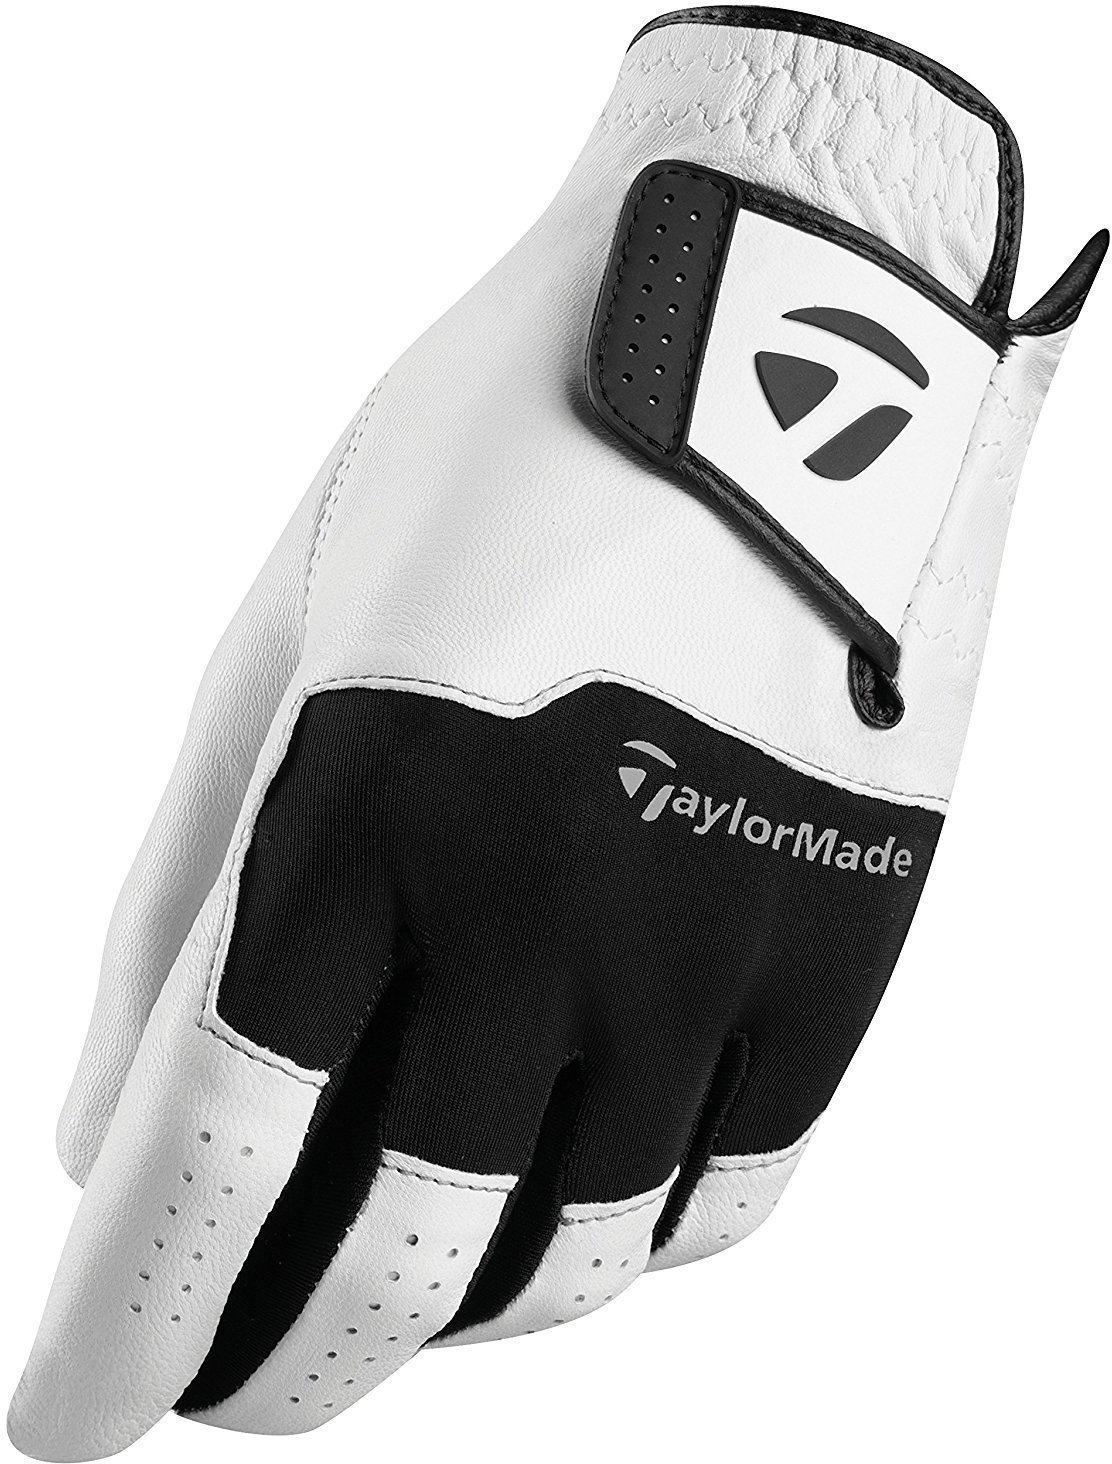 Gloves TaylorMade Stratus Leather Mens Golf Glove White/Black LH S